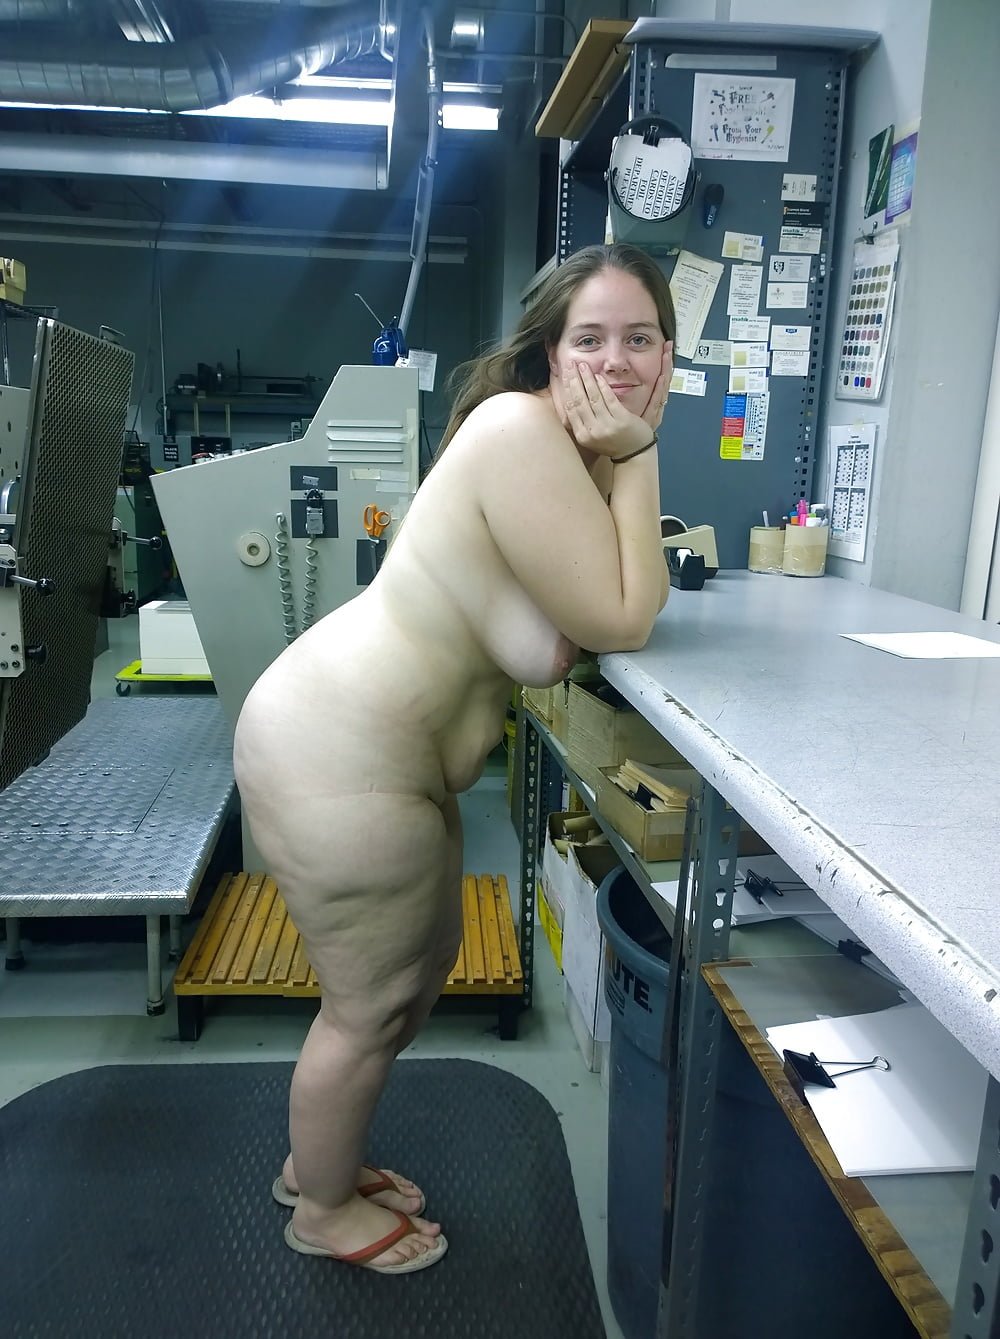 ann schlosser recommends woman naked at work pic